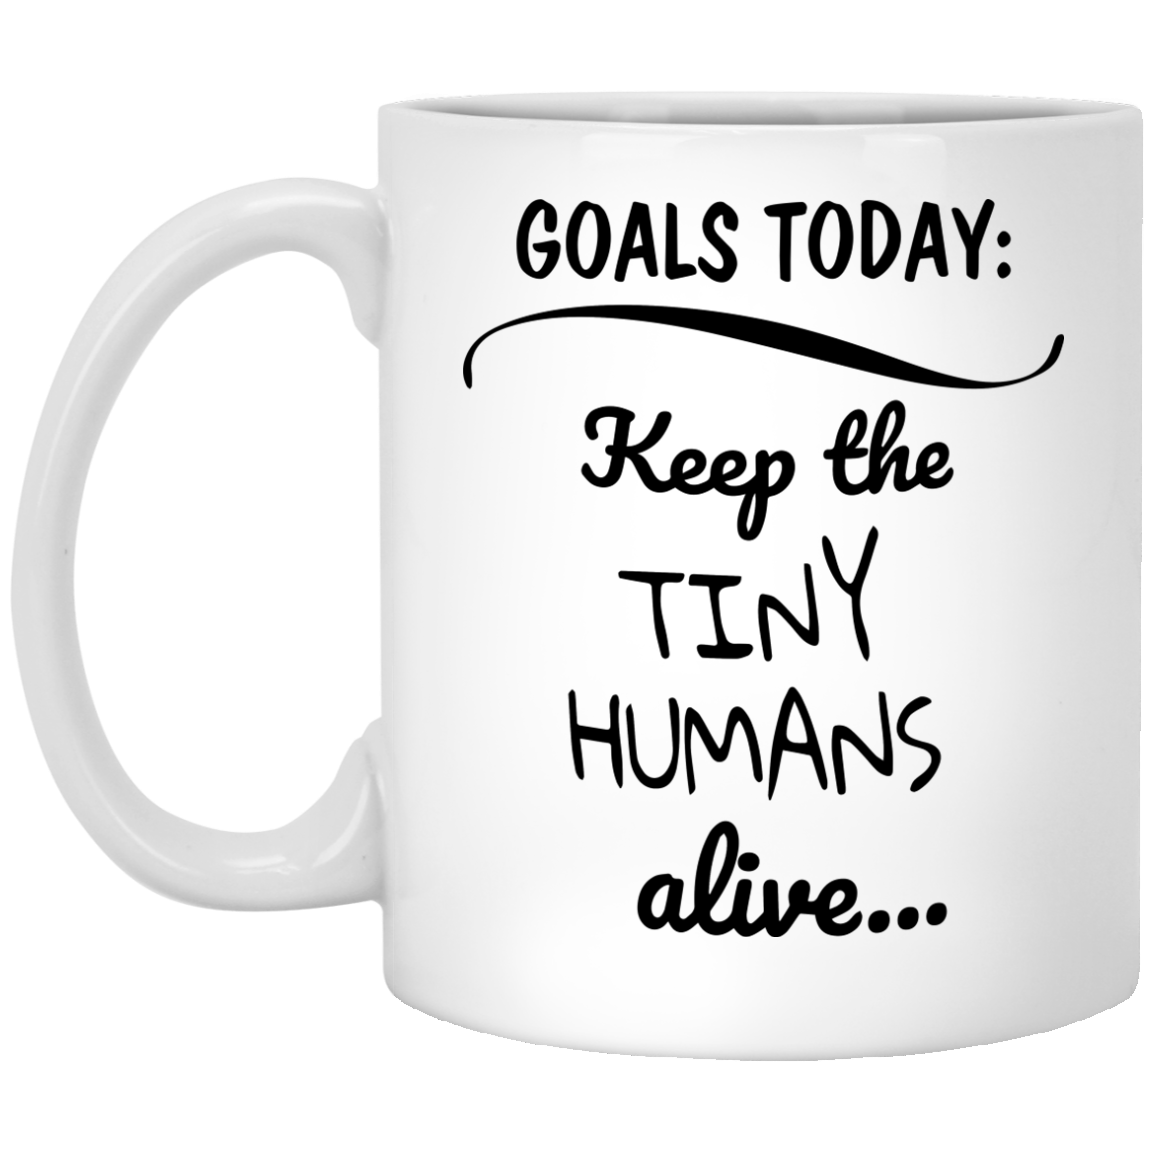 Goals today: keep the tiny humans alive funny mugs